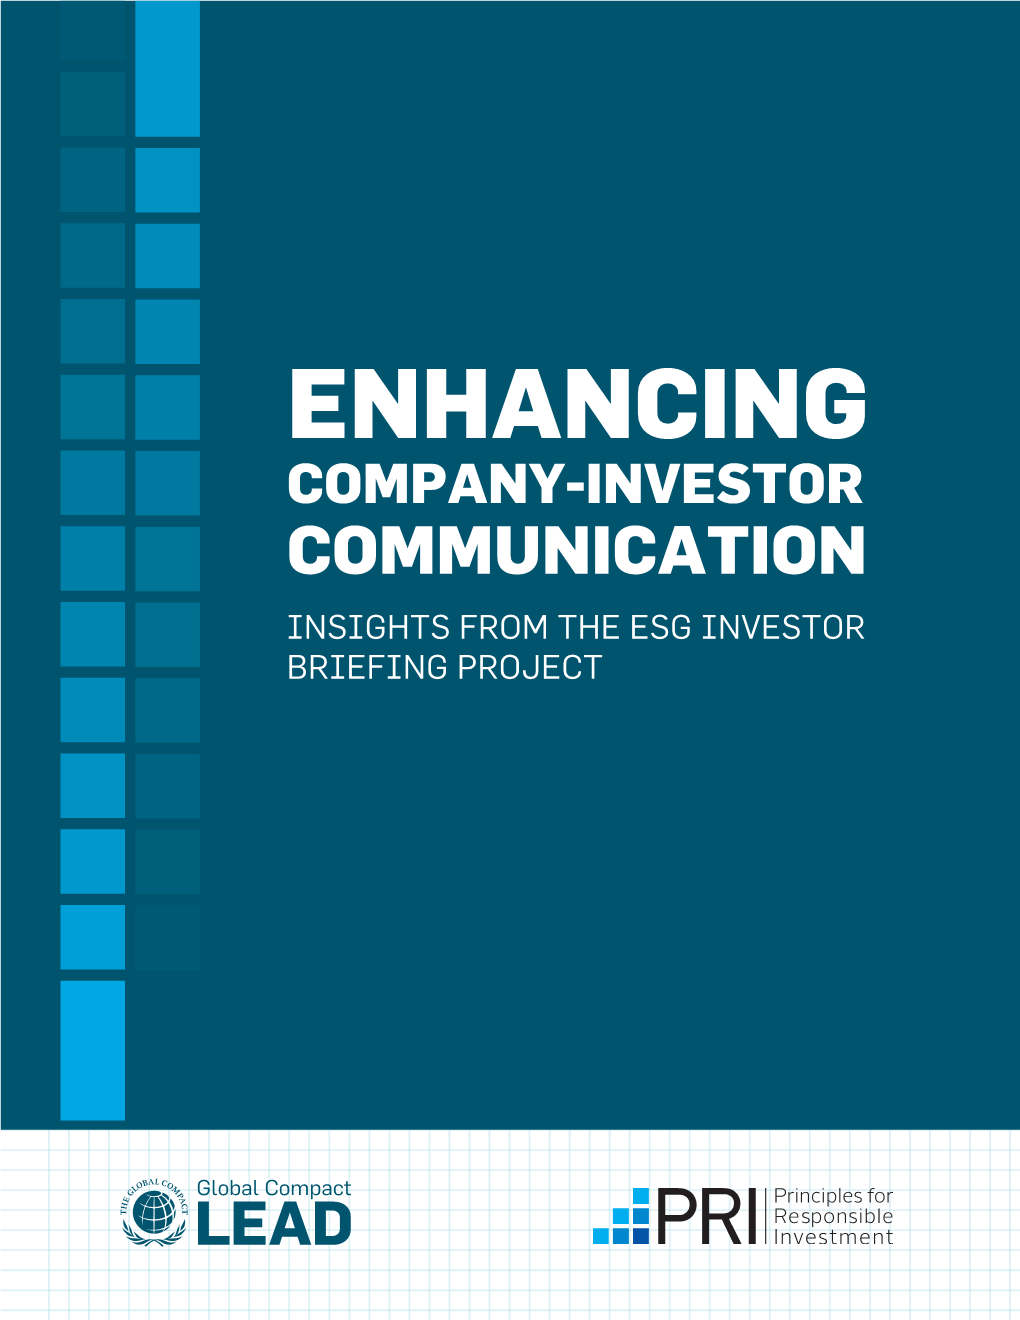 Enhancing Company-Investor Communication Insights from the Esg Investor Briefing Project